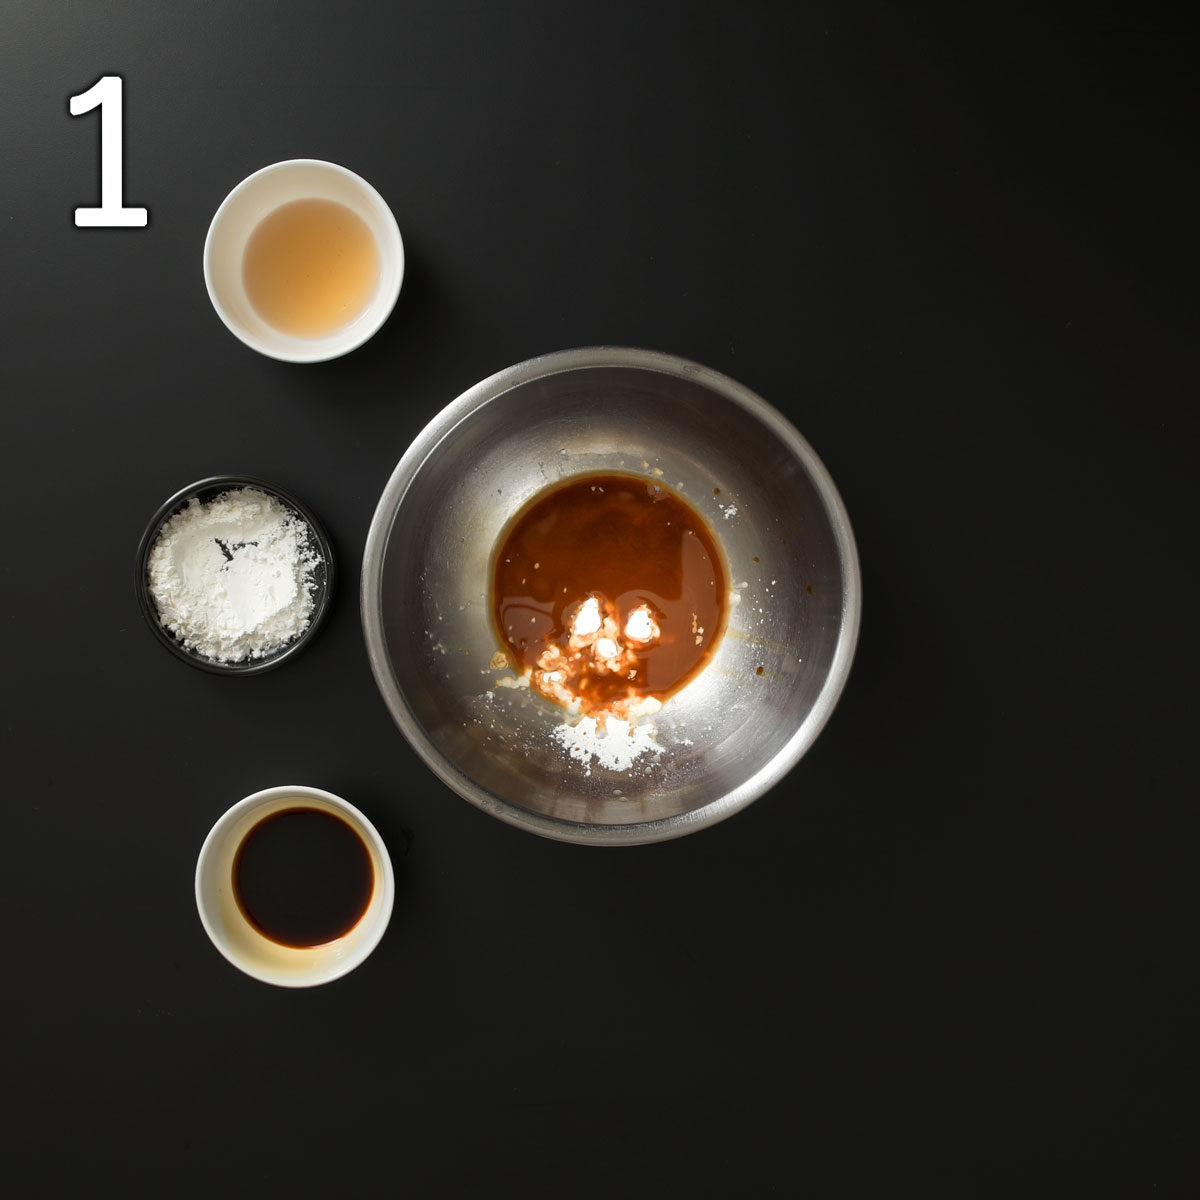 bowls of sherry, soy sauce and cornstarch next to larger mixing bowl with small amounts of each of those ingredients.